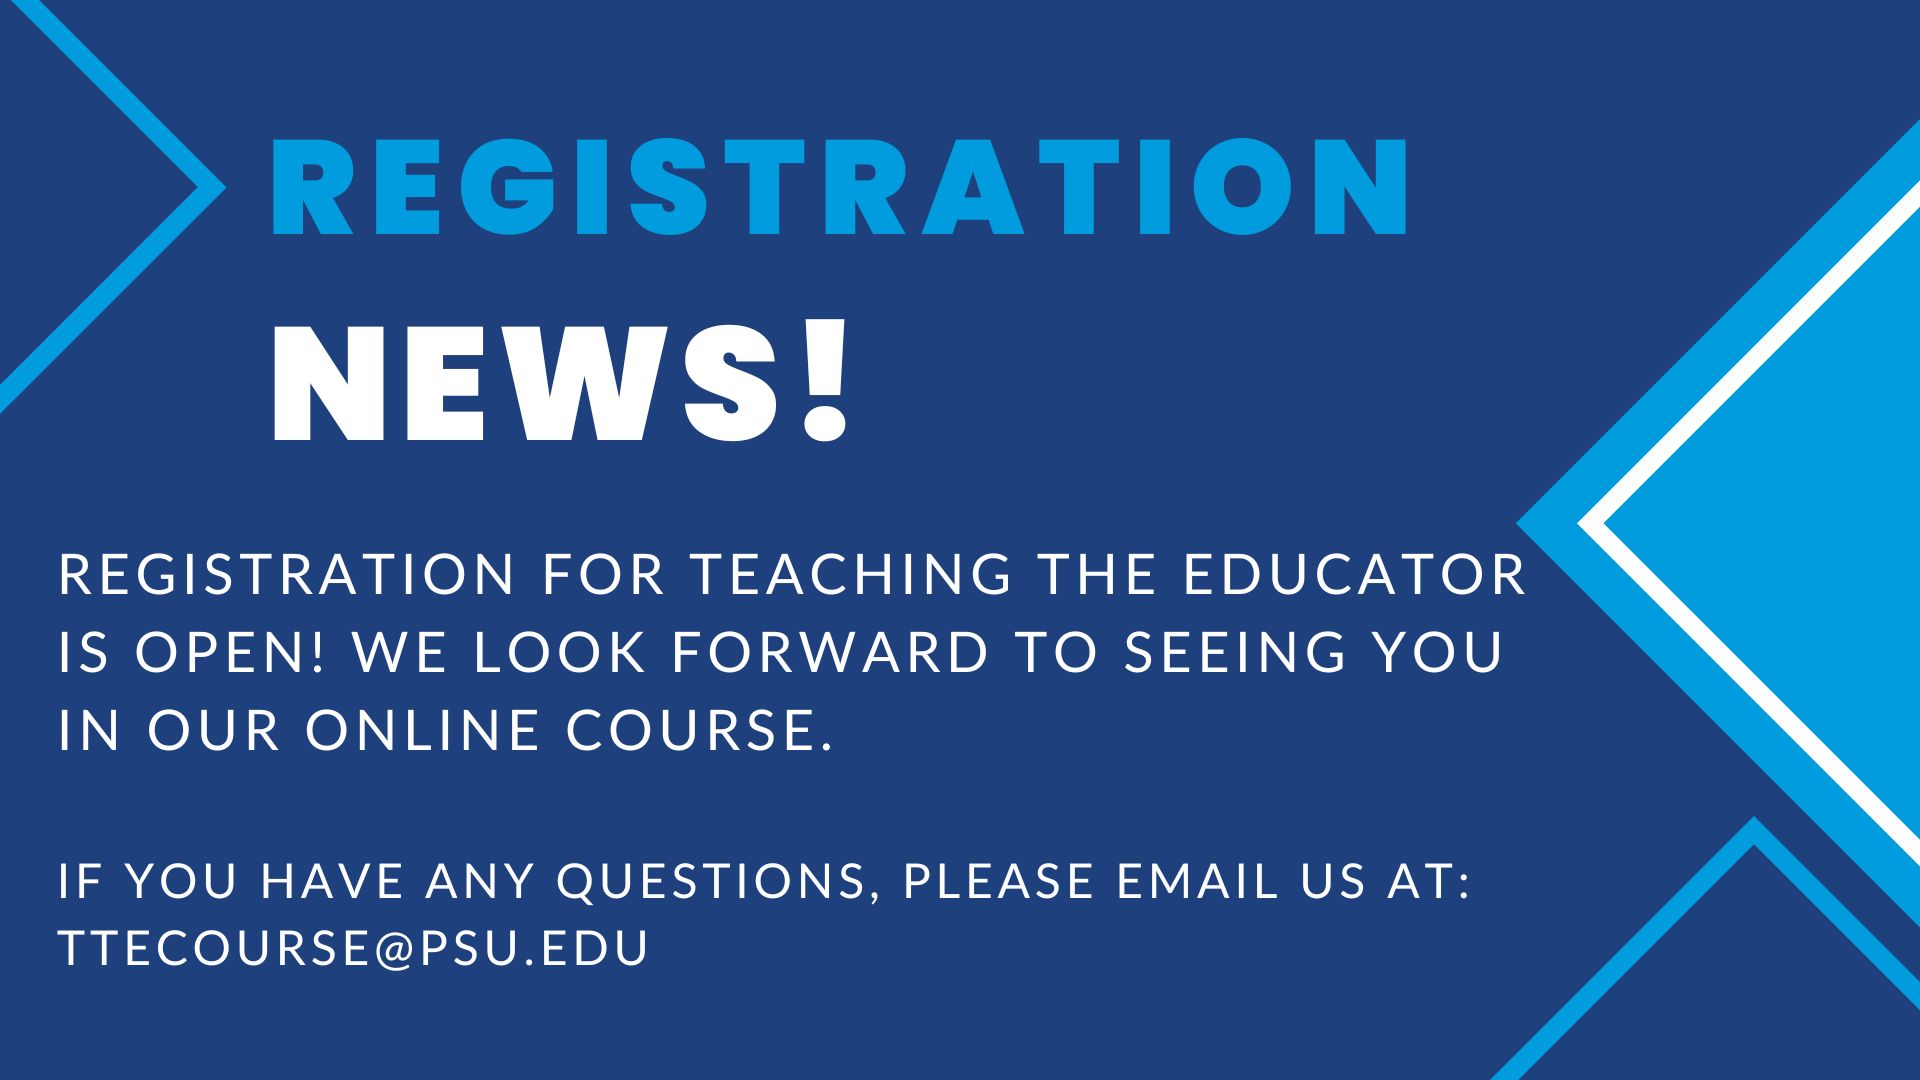 Registration for Teaching The Educator is Open.